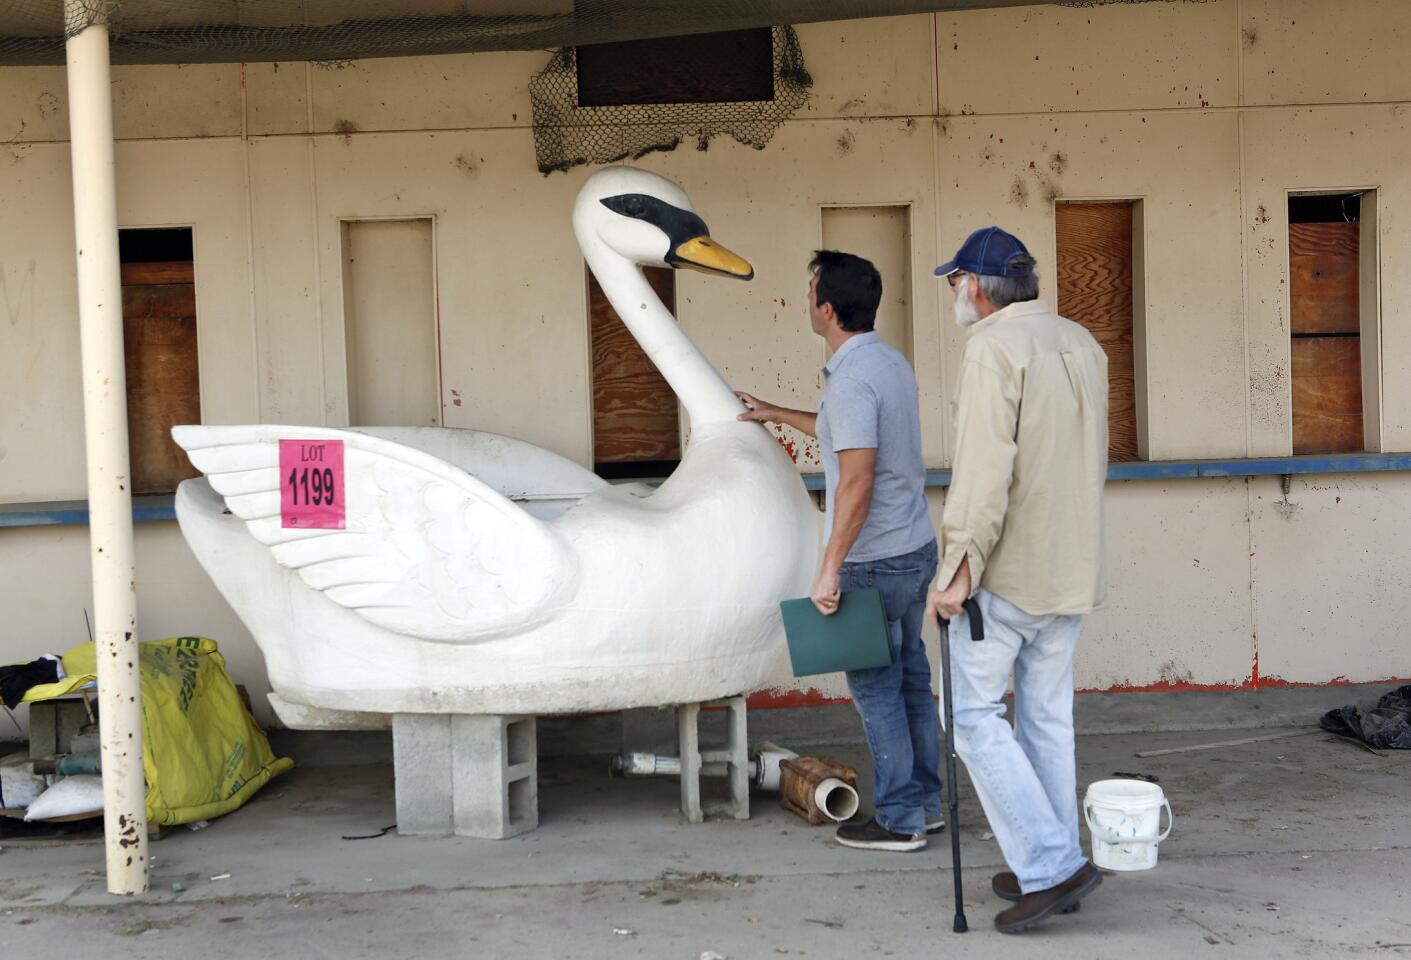 Sergio Santino, left, of San Marino and friend Jerry Rosenfeld of Pasadena inspect a 7-foot-high swan boat in the infield at Hollywood Park.